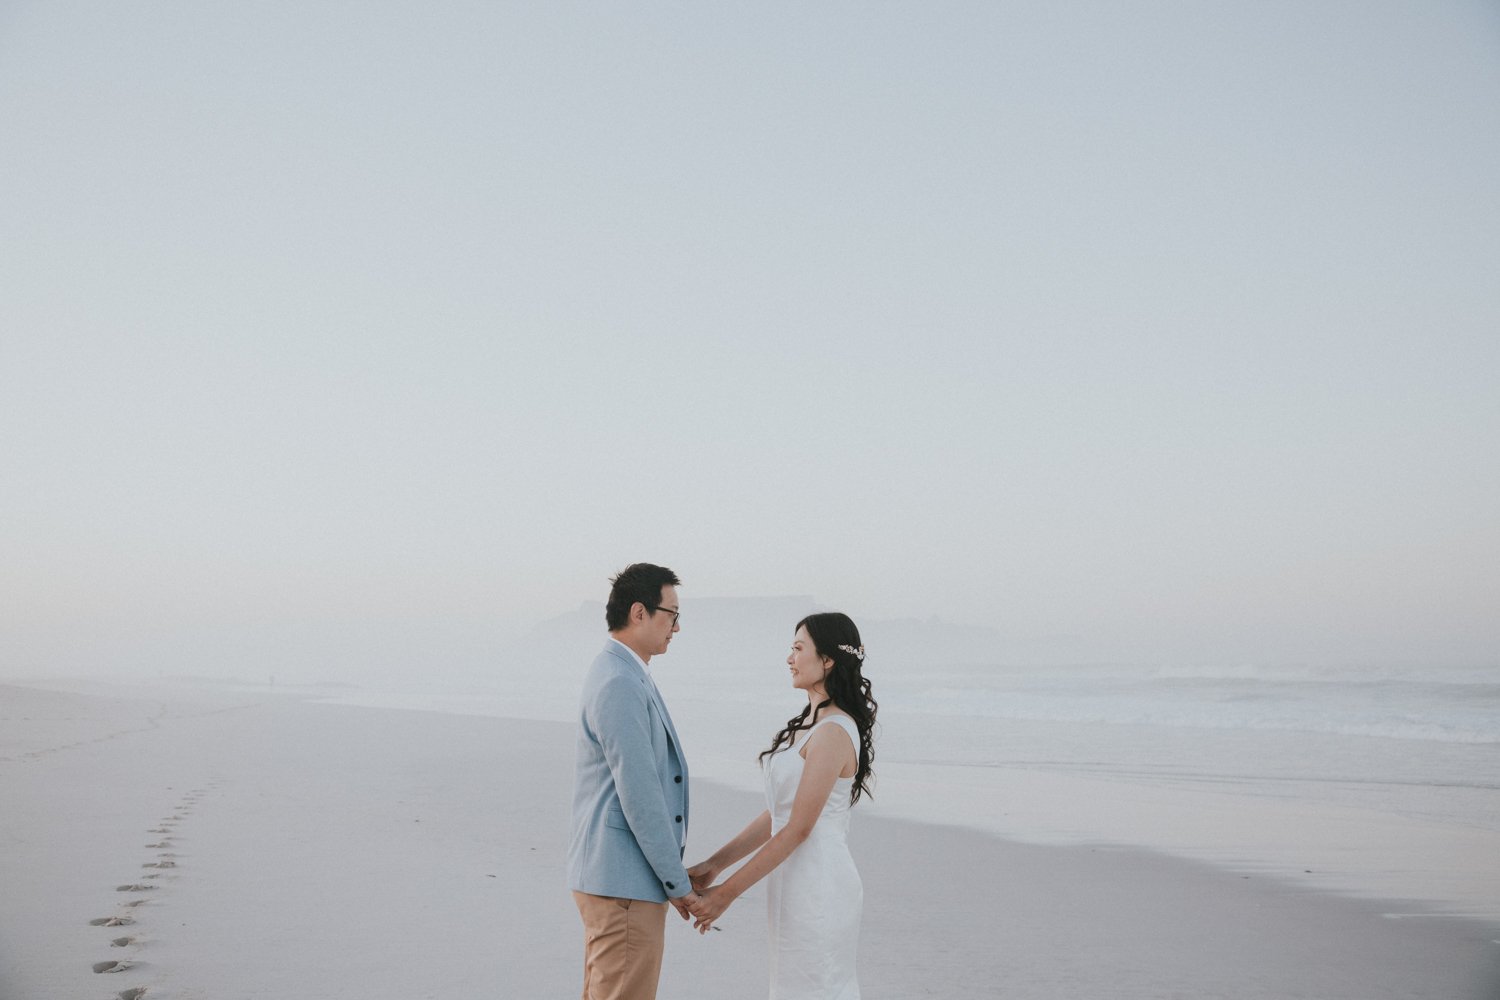 Wedding Shoot in Cape Town - Bianca Asher Photography-8.jpg